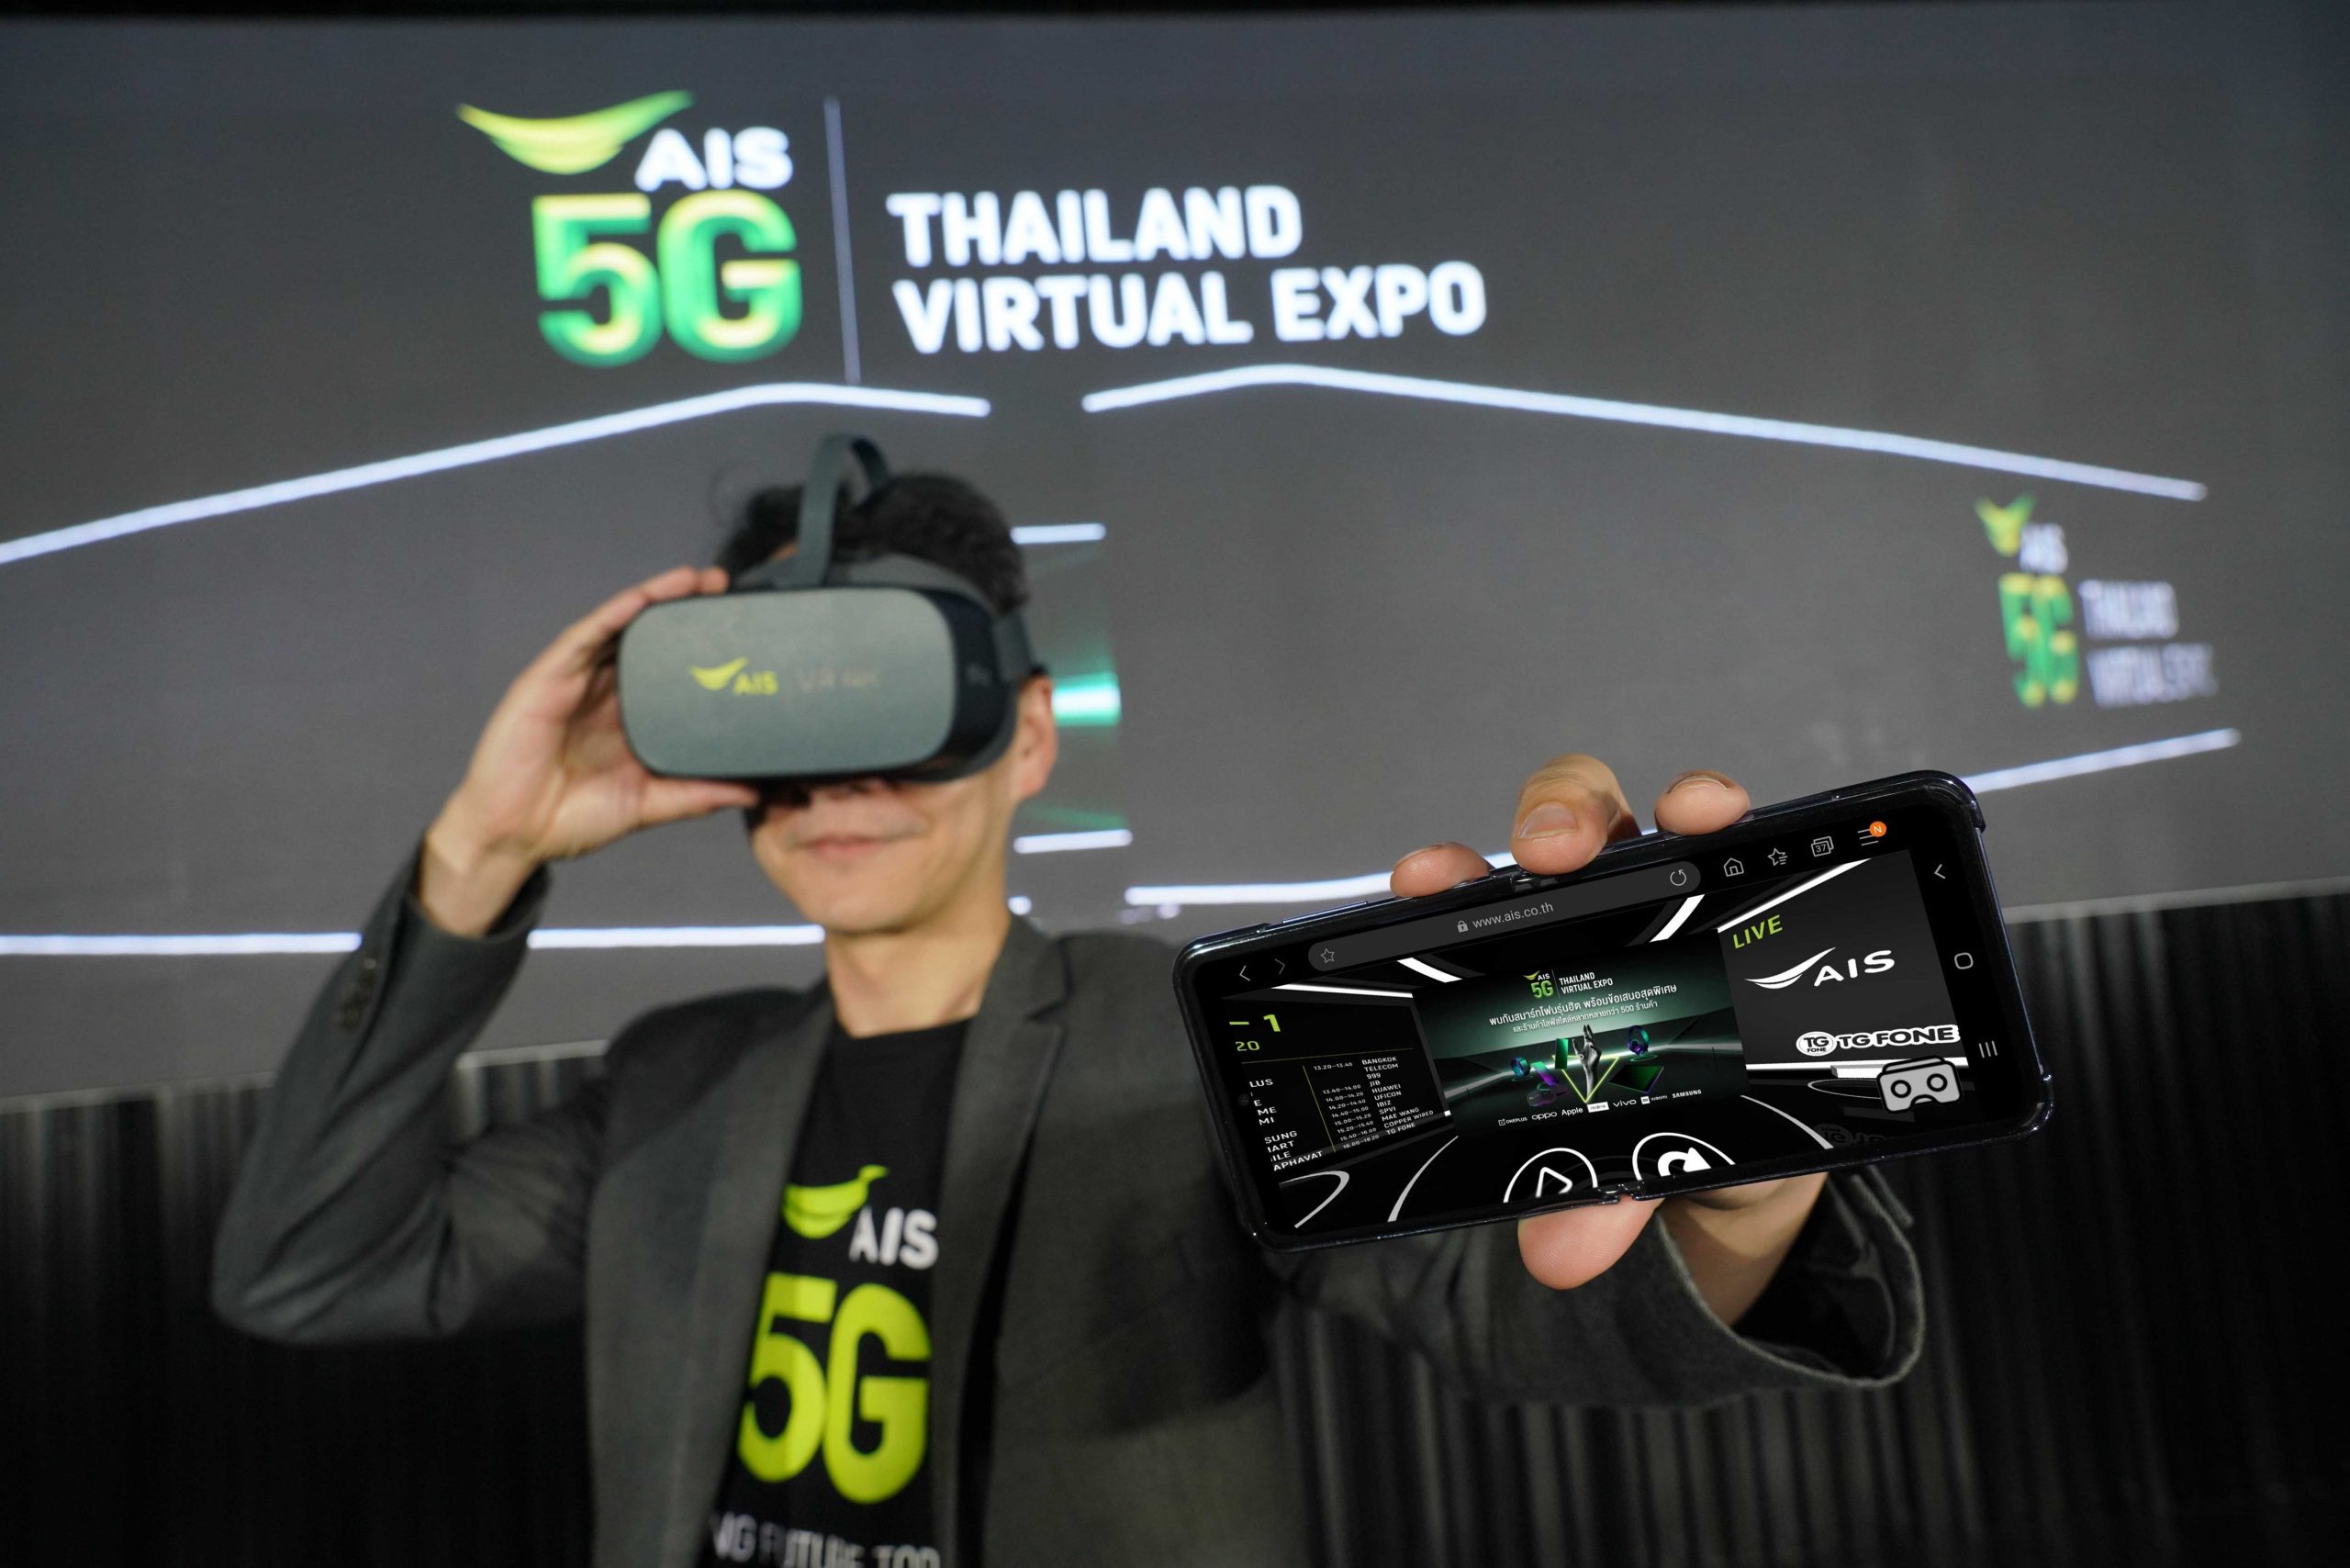 AIS 5G Thailand Virtual Expo, the first phenomenon in Thailand! The expo of IT, Food and Lifestyle, the biggest online virtual world